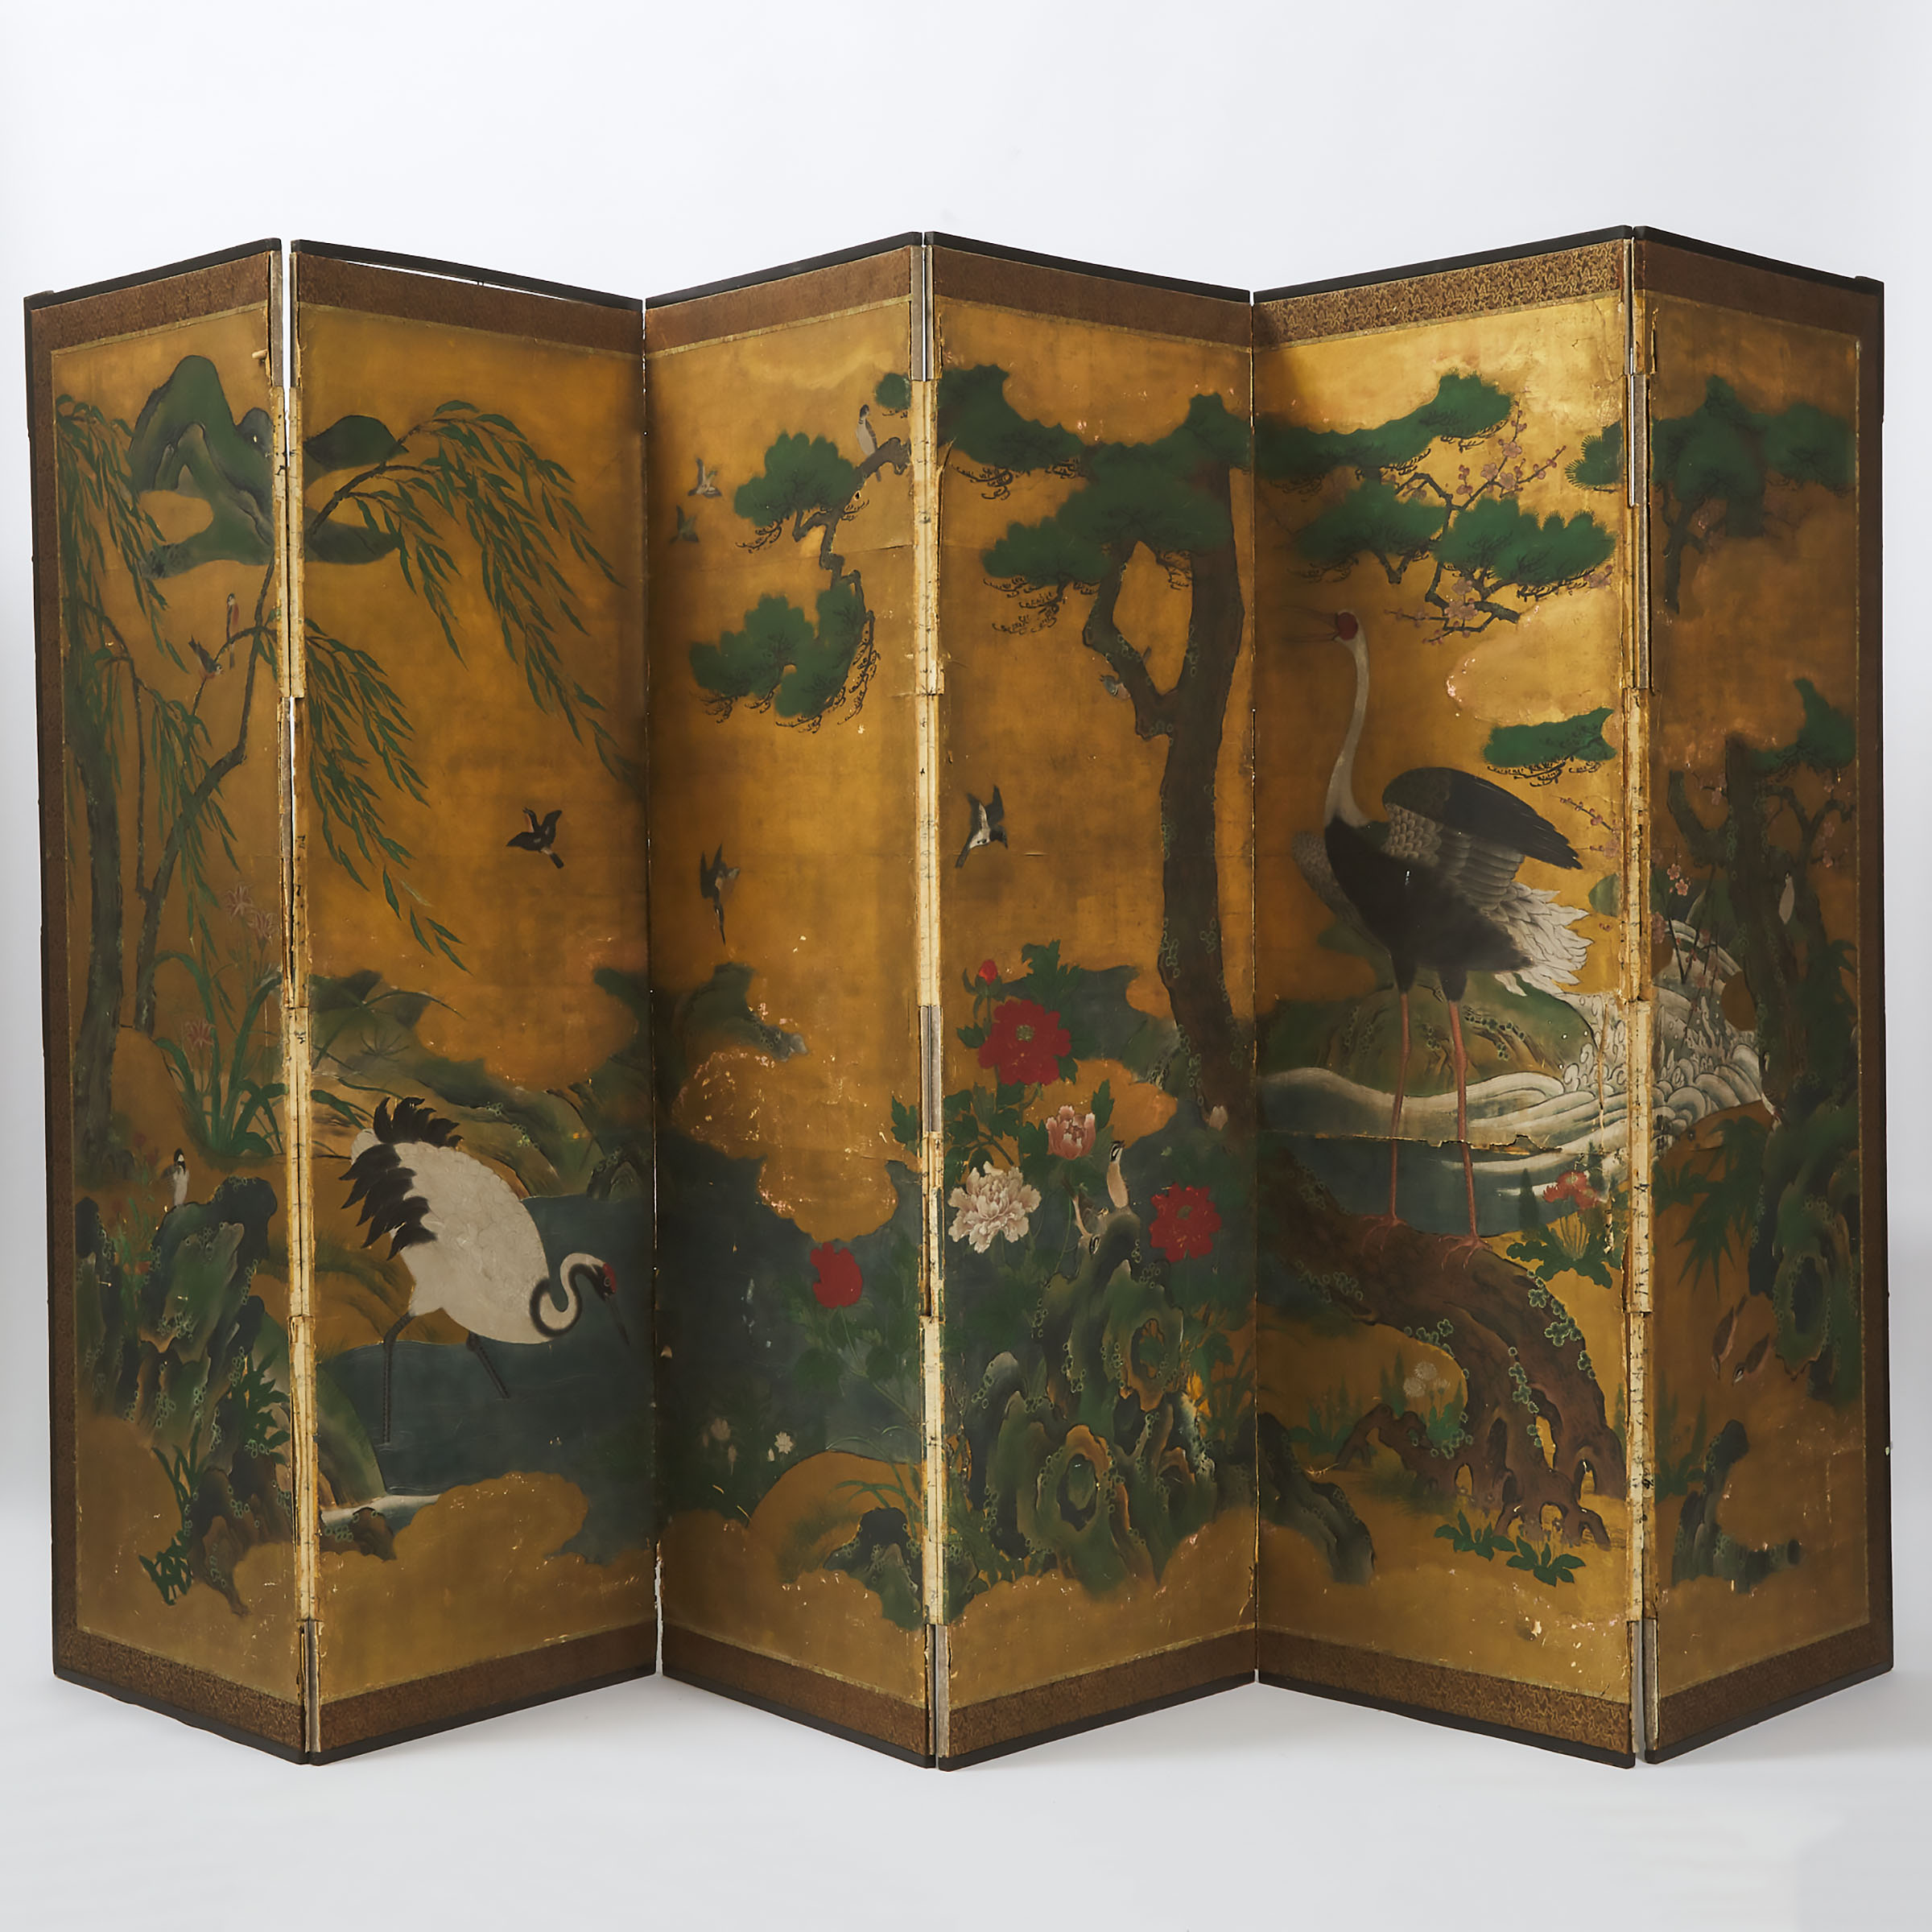 Attributed to Kano Shoei (1519-1592), Birds and Flowers of the Four Seasons